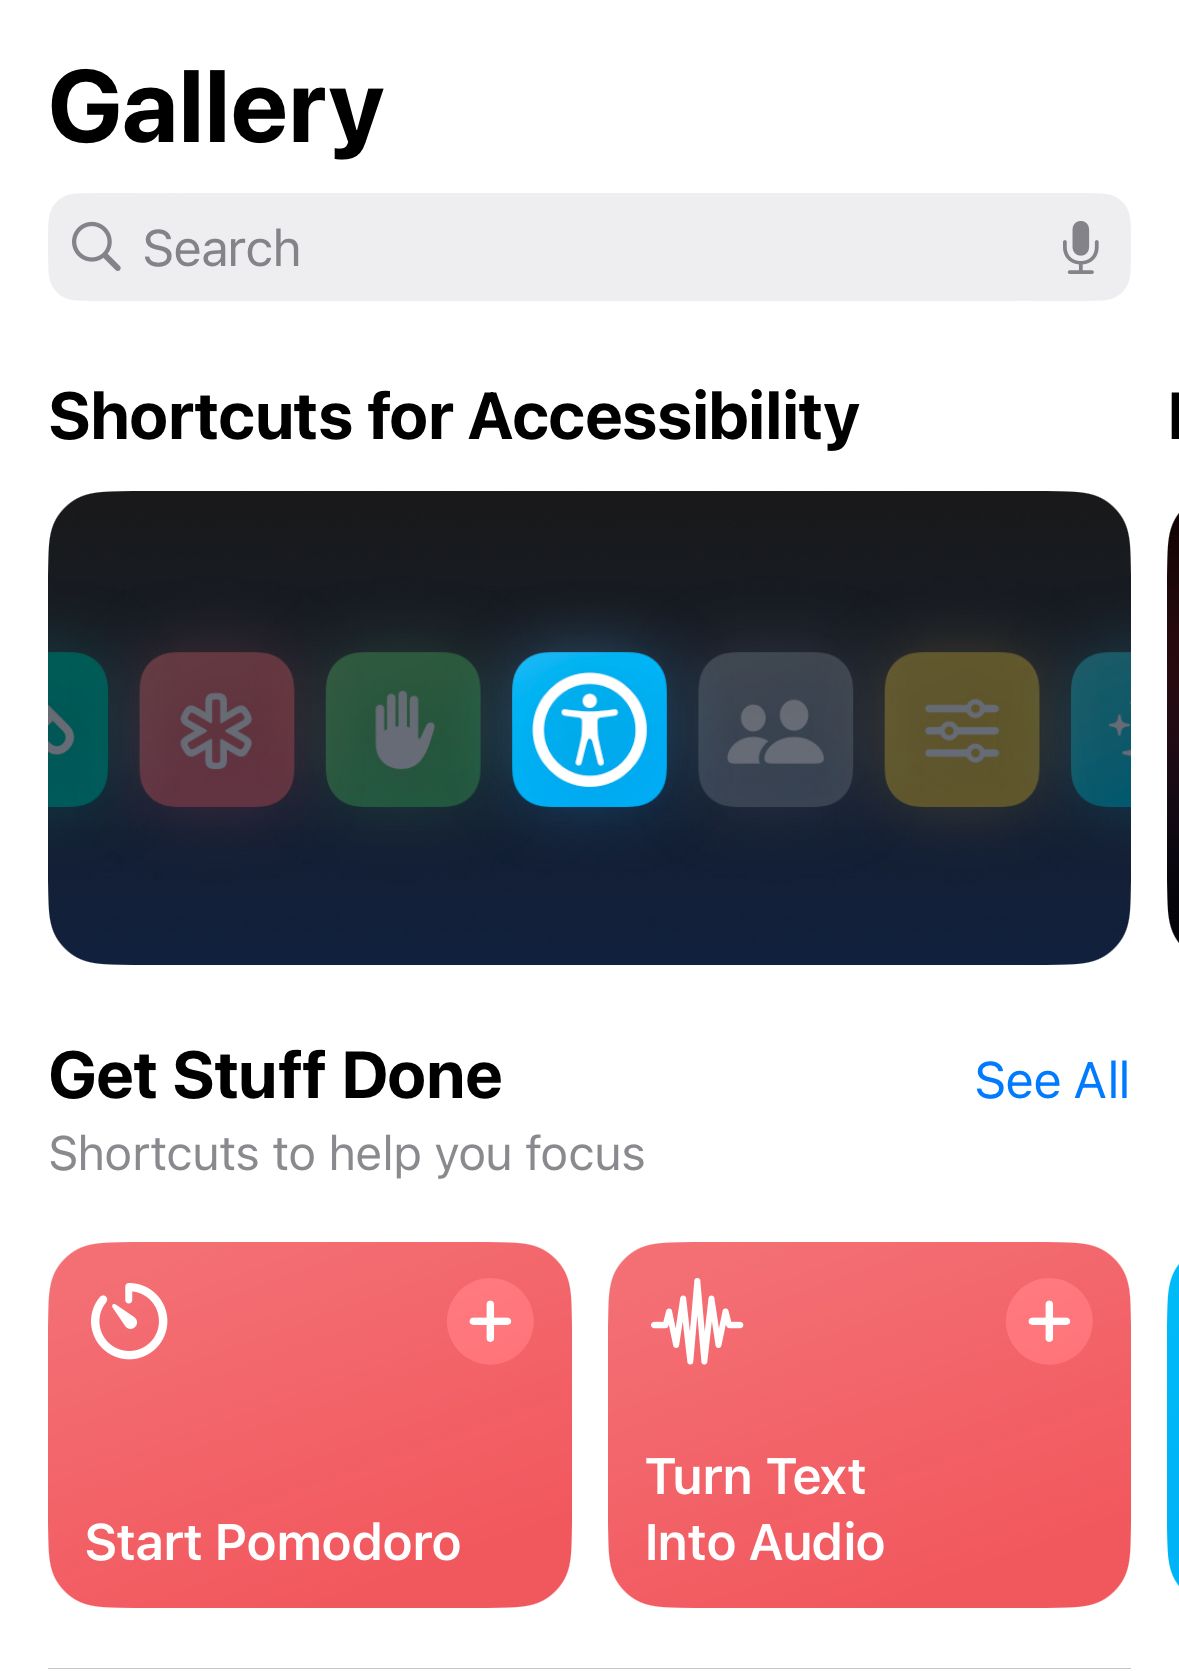 Gallery within the Shortcuts app.